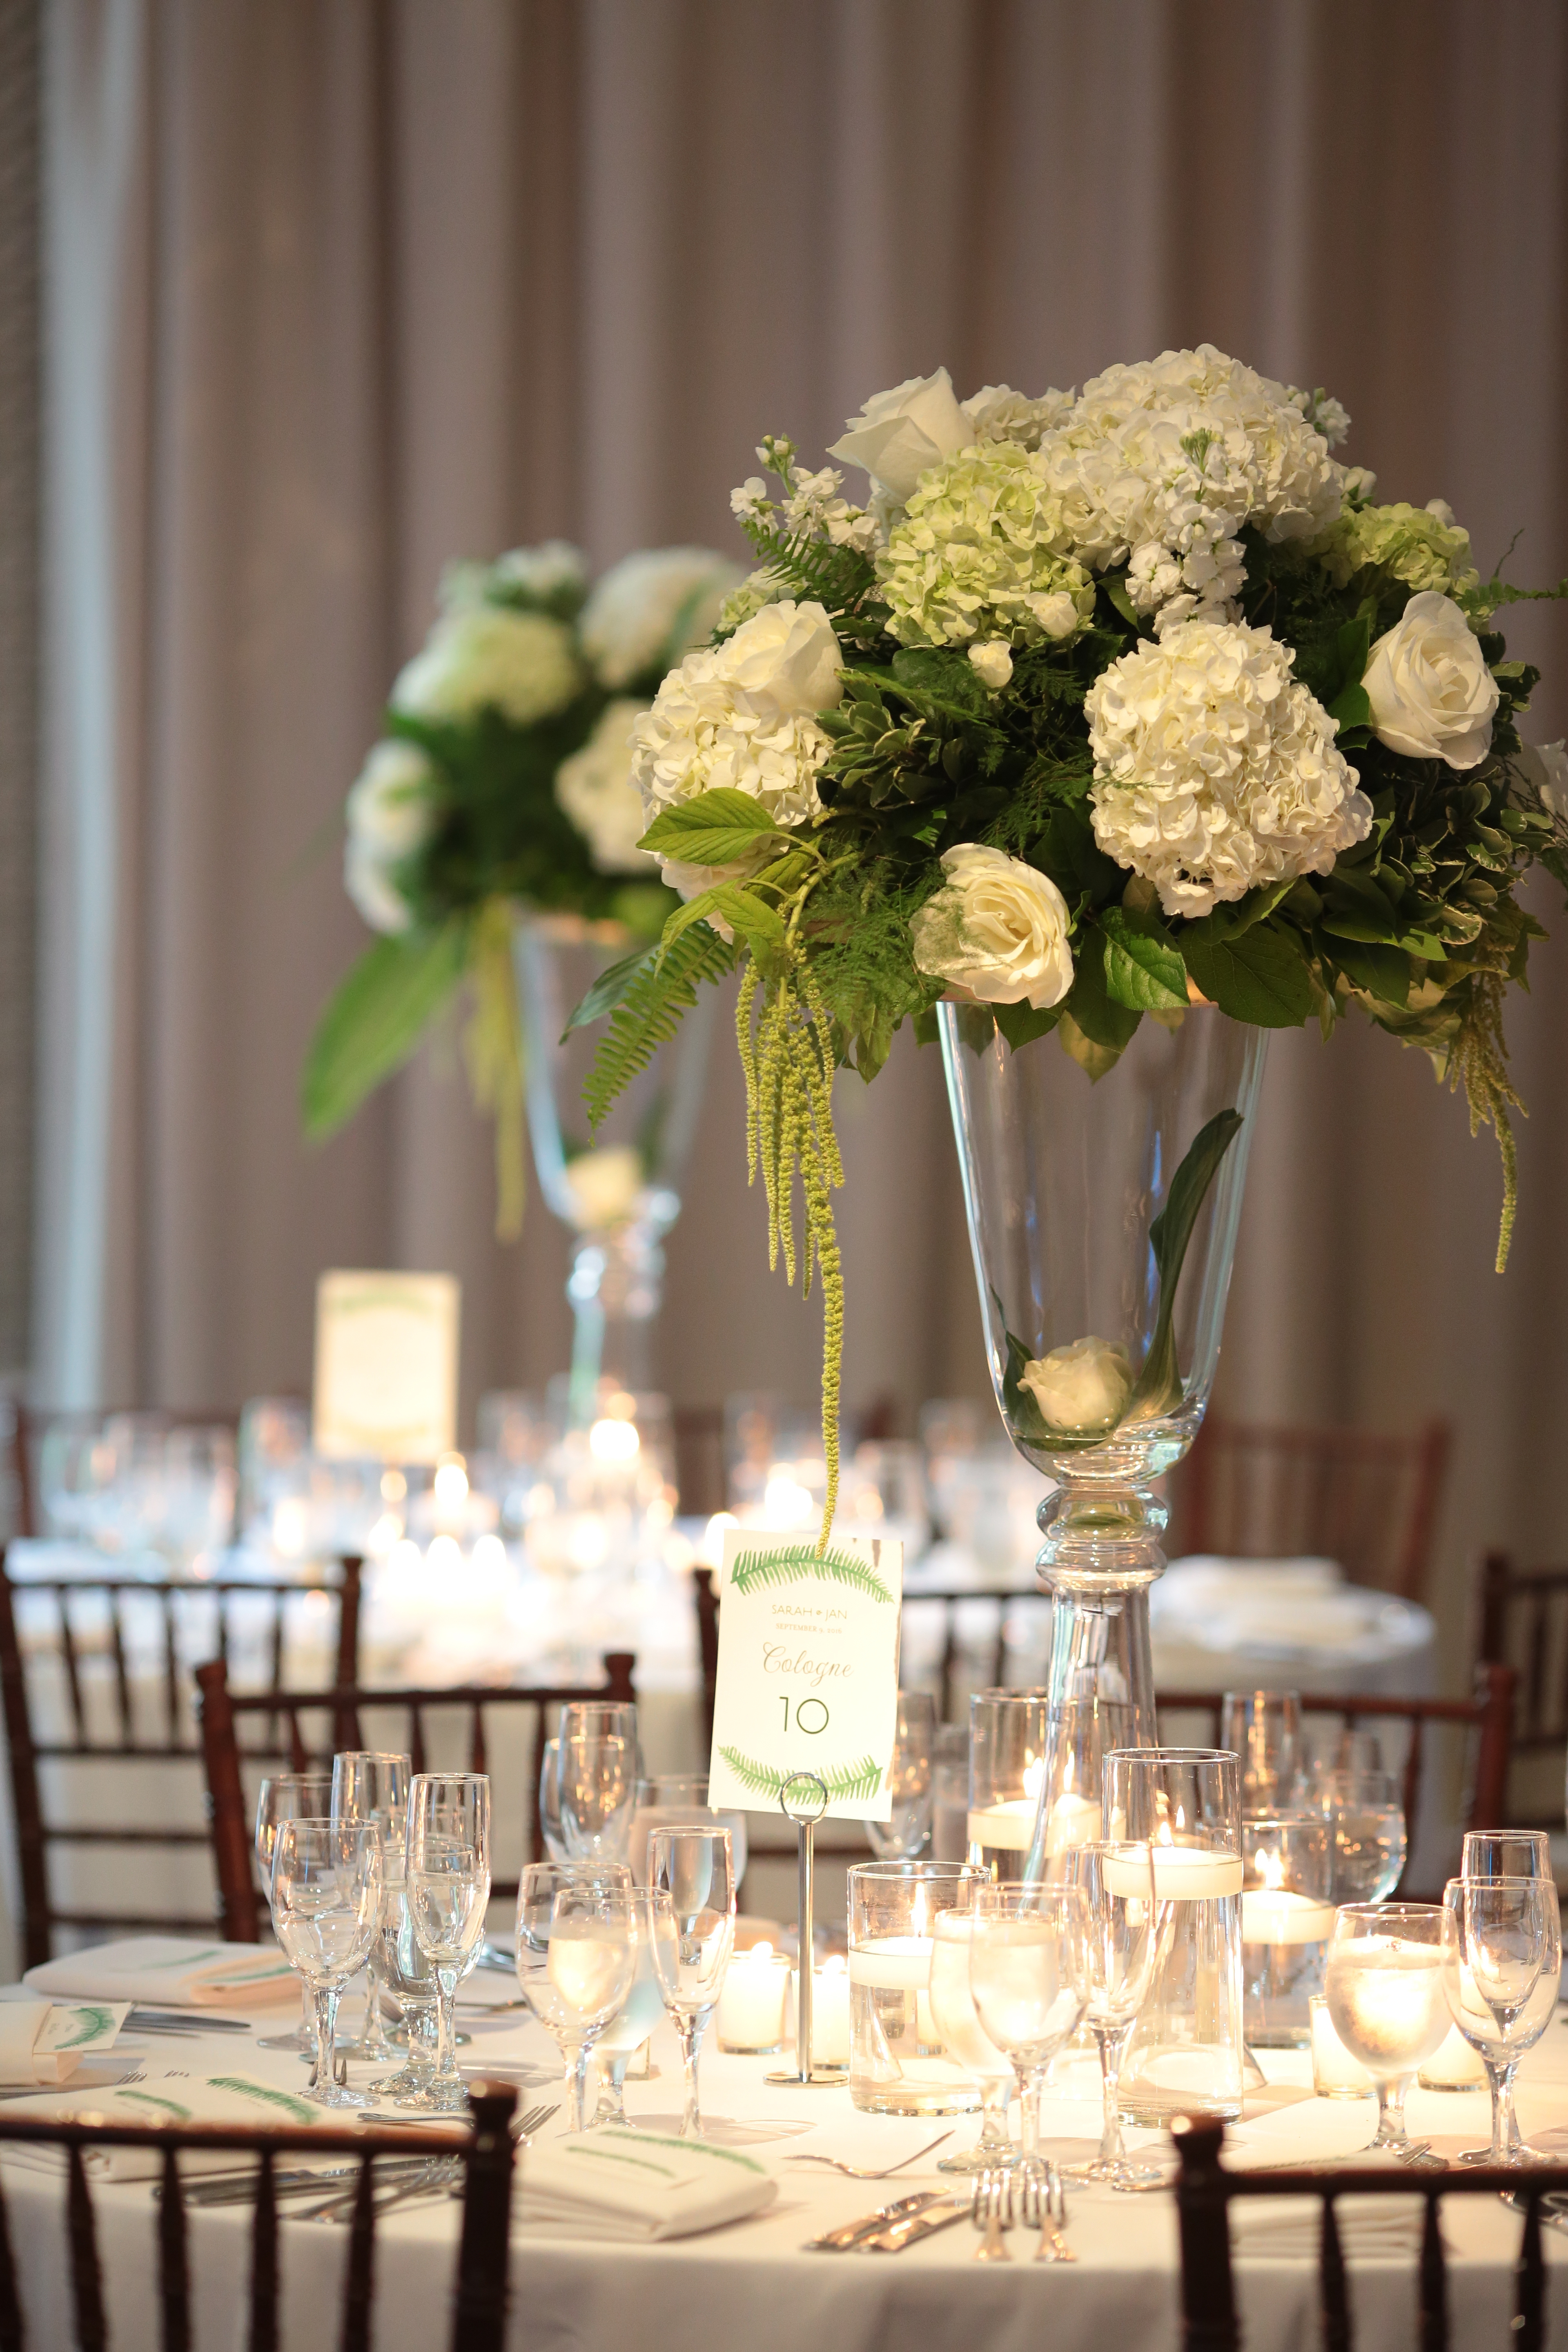 Greenery inspiration for your wedding centerpieces that is both elegant and classic. Perfect for a garden or outdoor wedding.